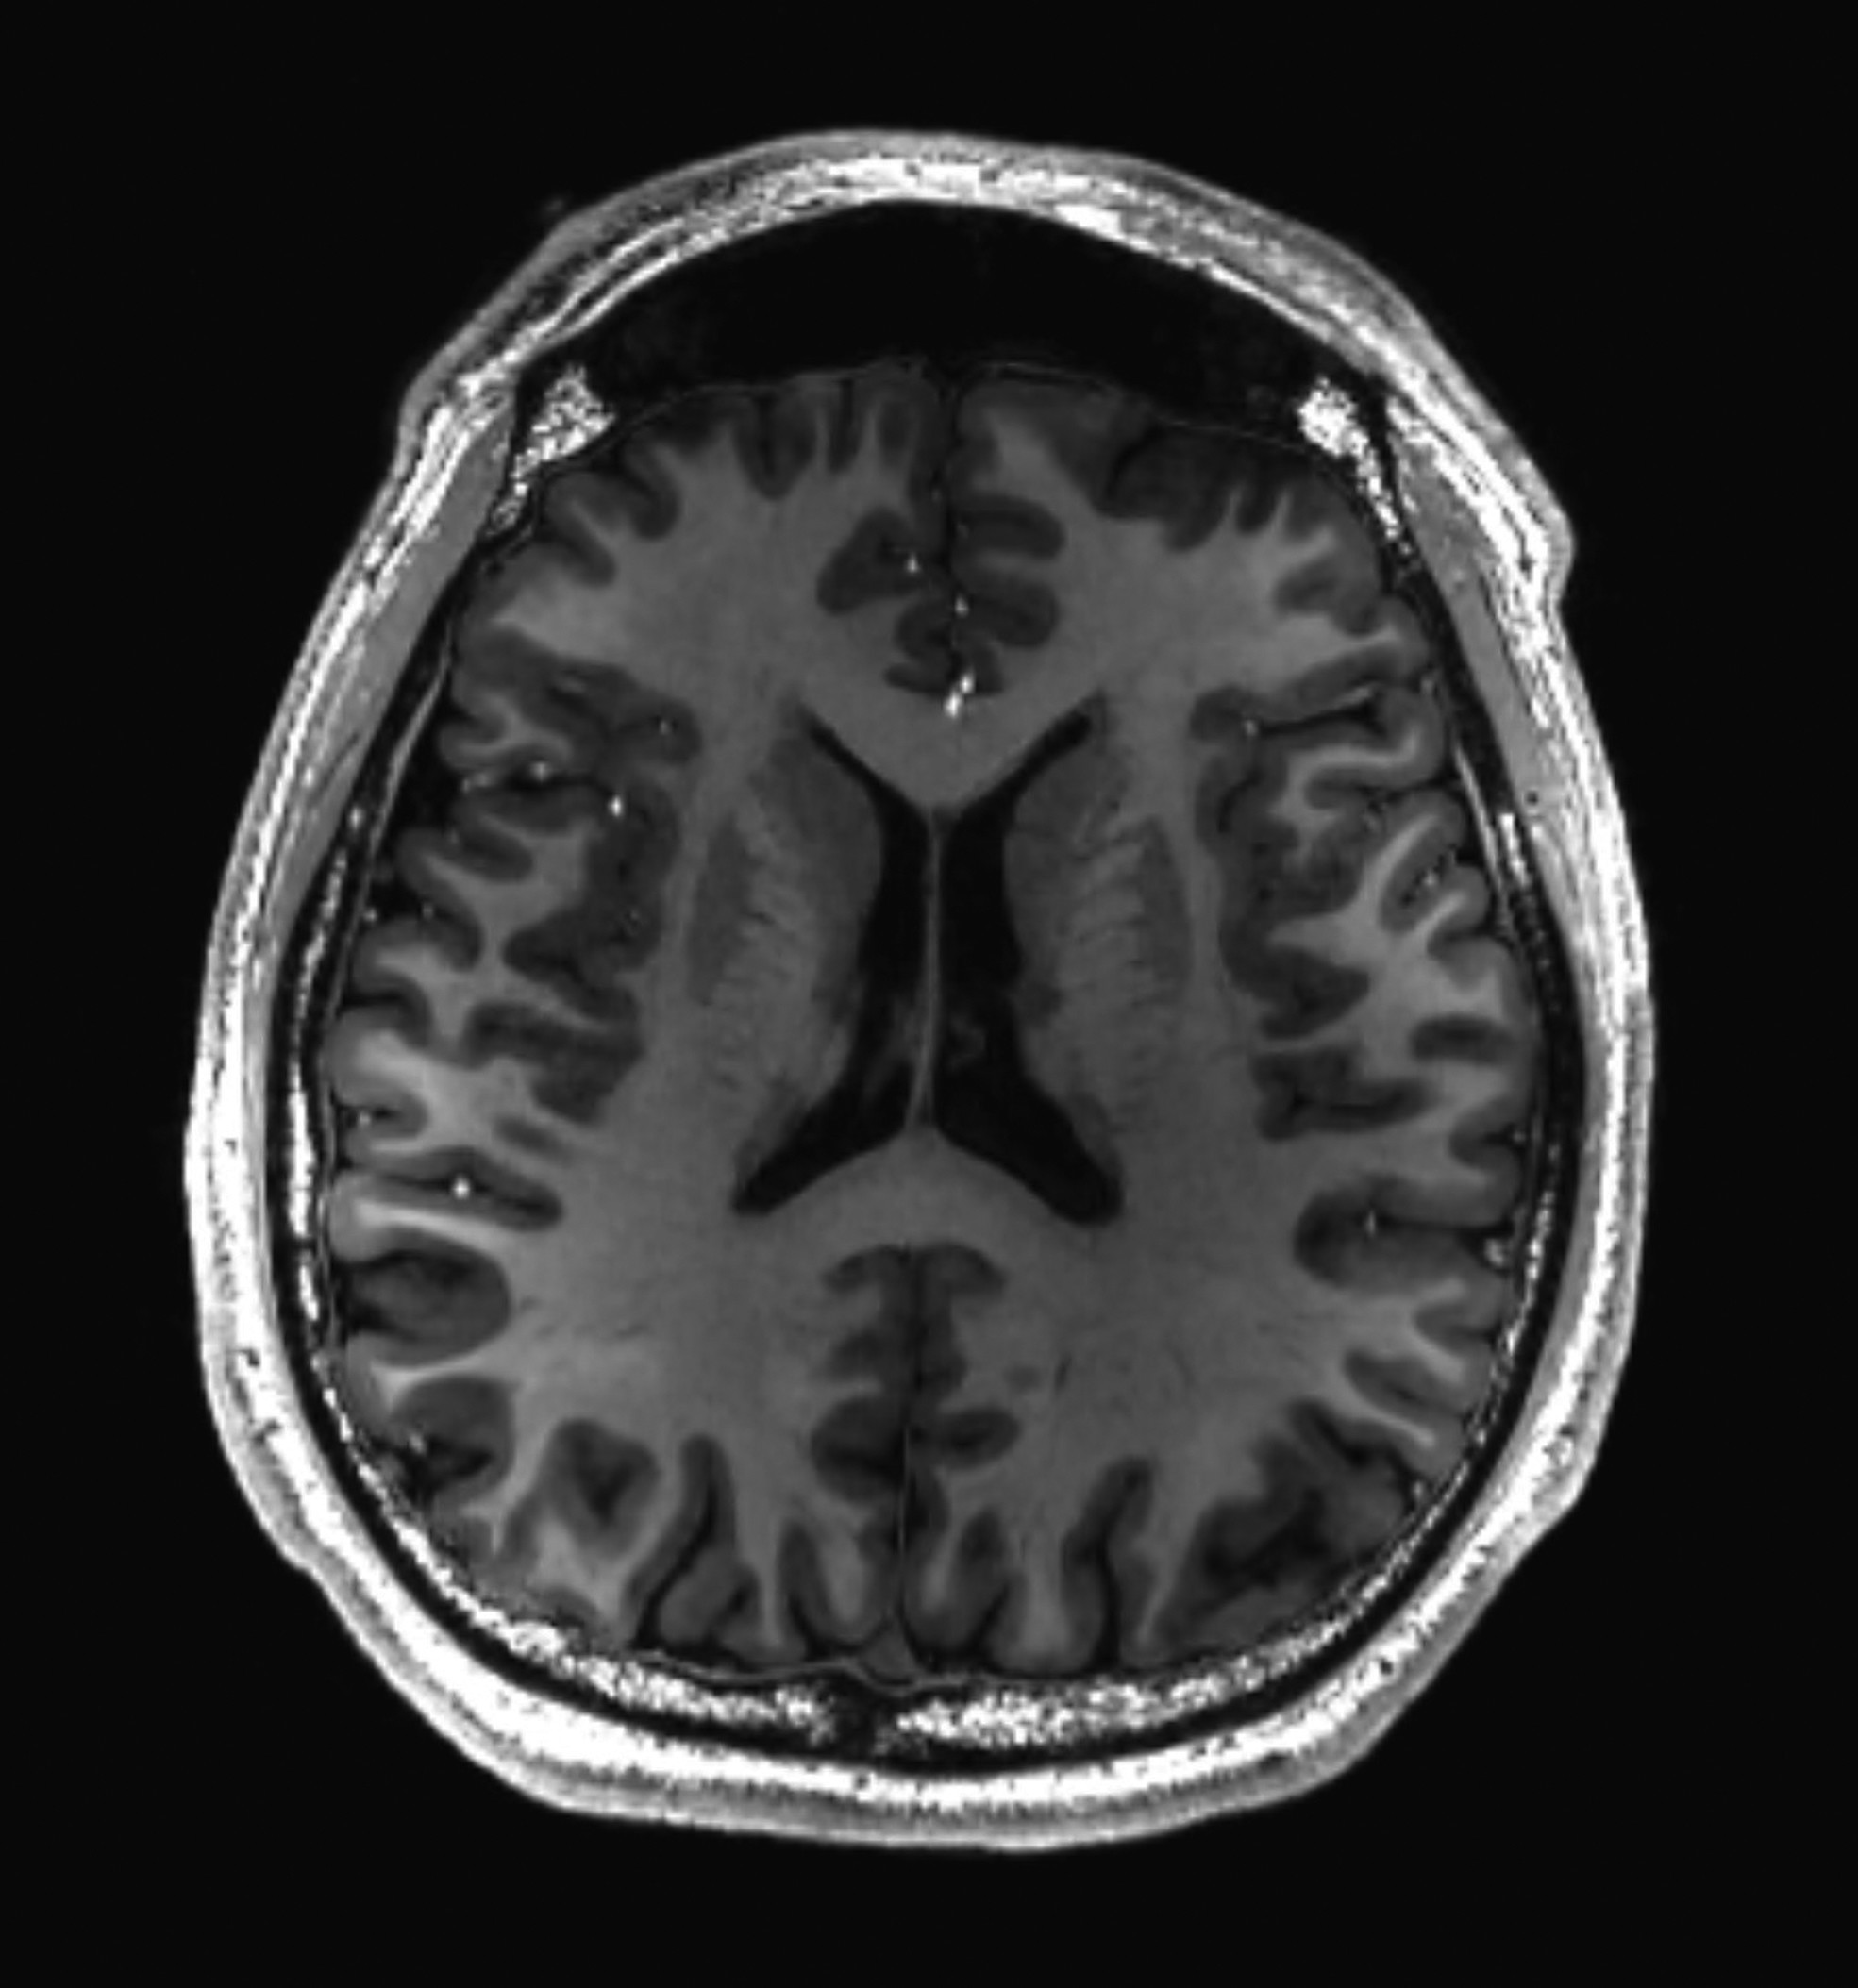  CROSS-SECTIONAL T1-weighted MRI of a healthy human brain. (credit: WikimediaCommons/Asnaebsa)